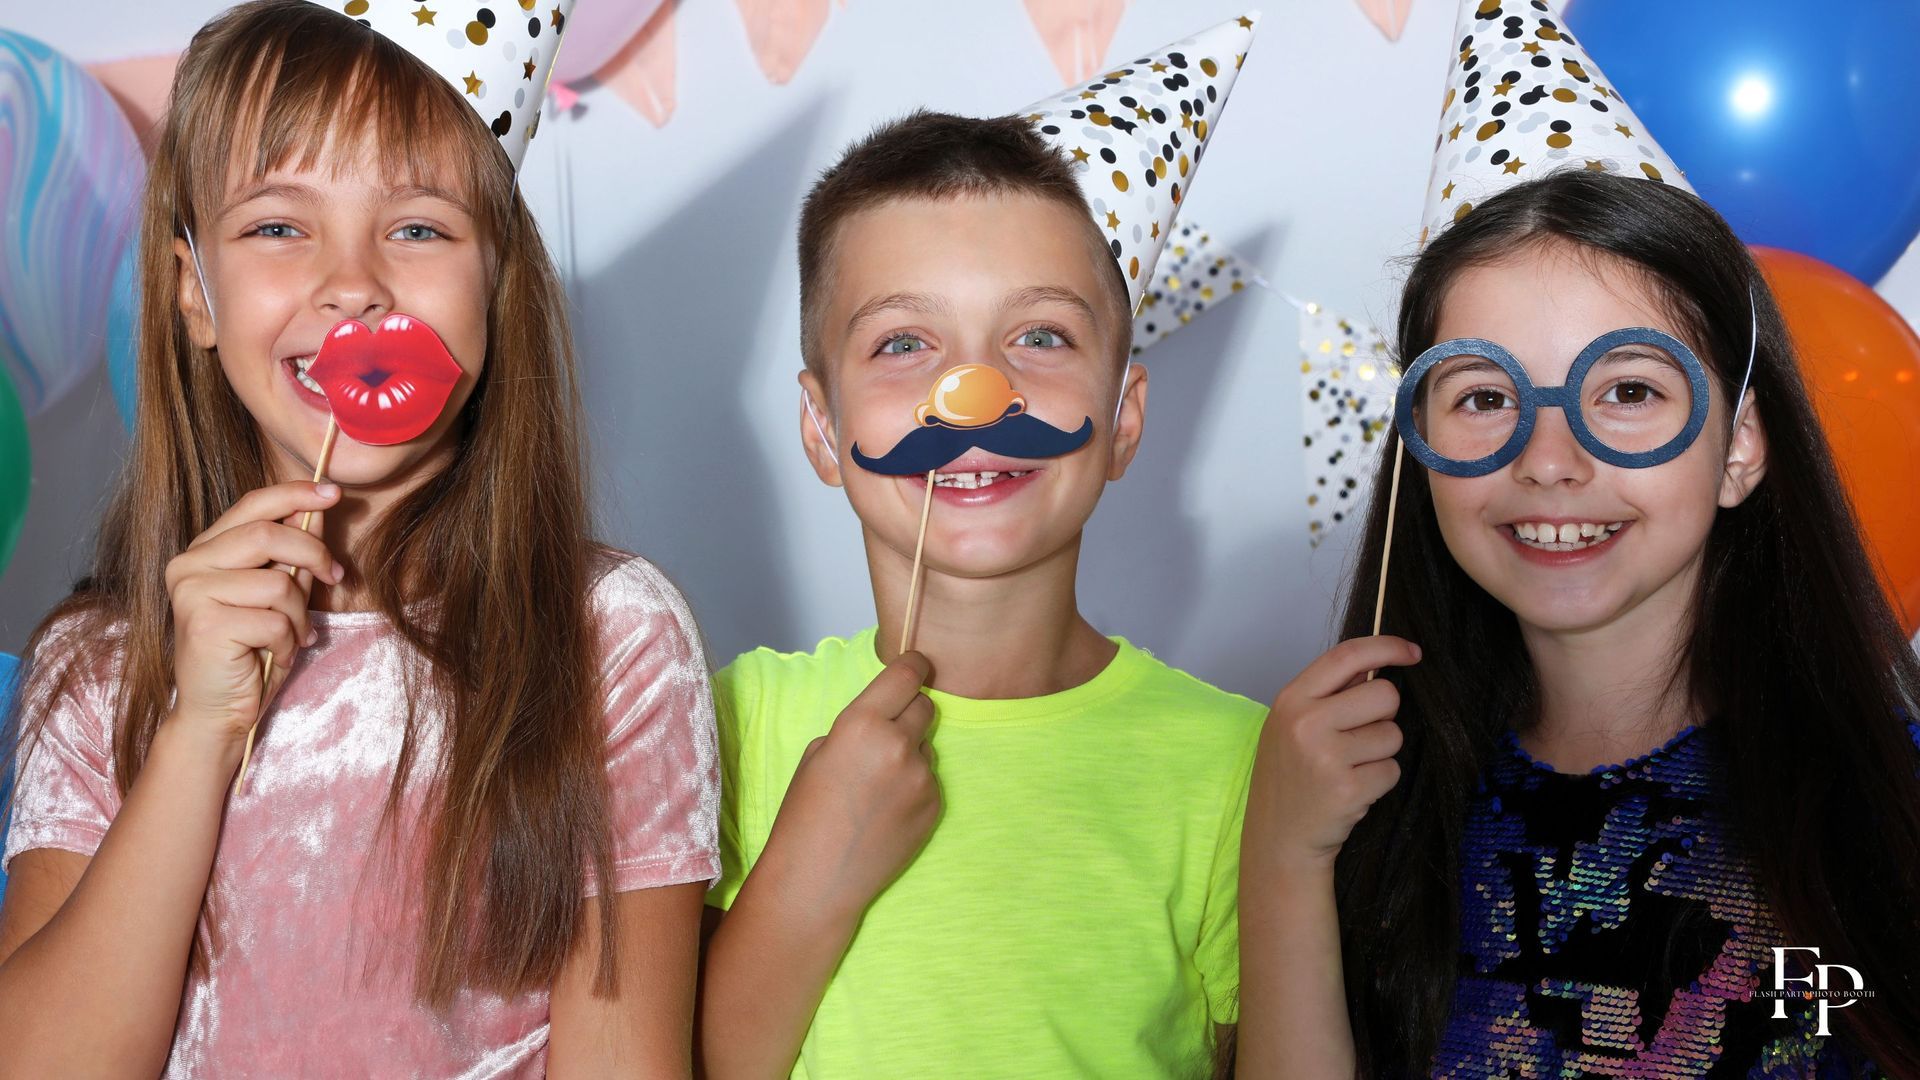 Three kids strike a pose with playful props in the photo booth during a special occasion in San Jose.